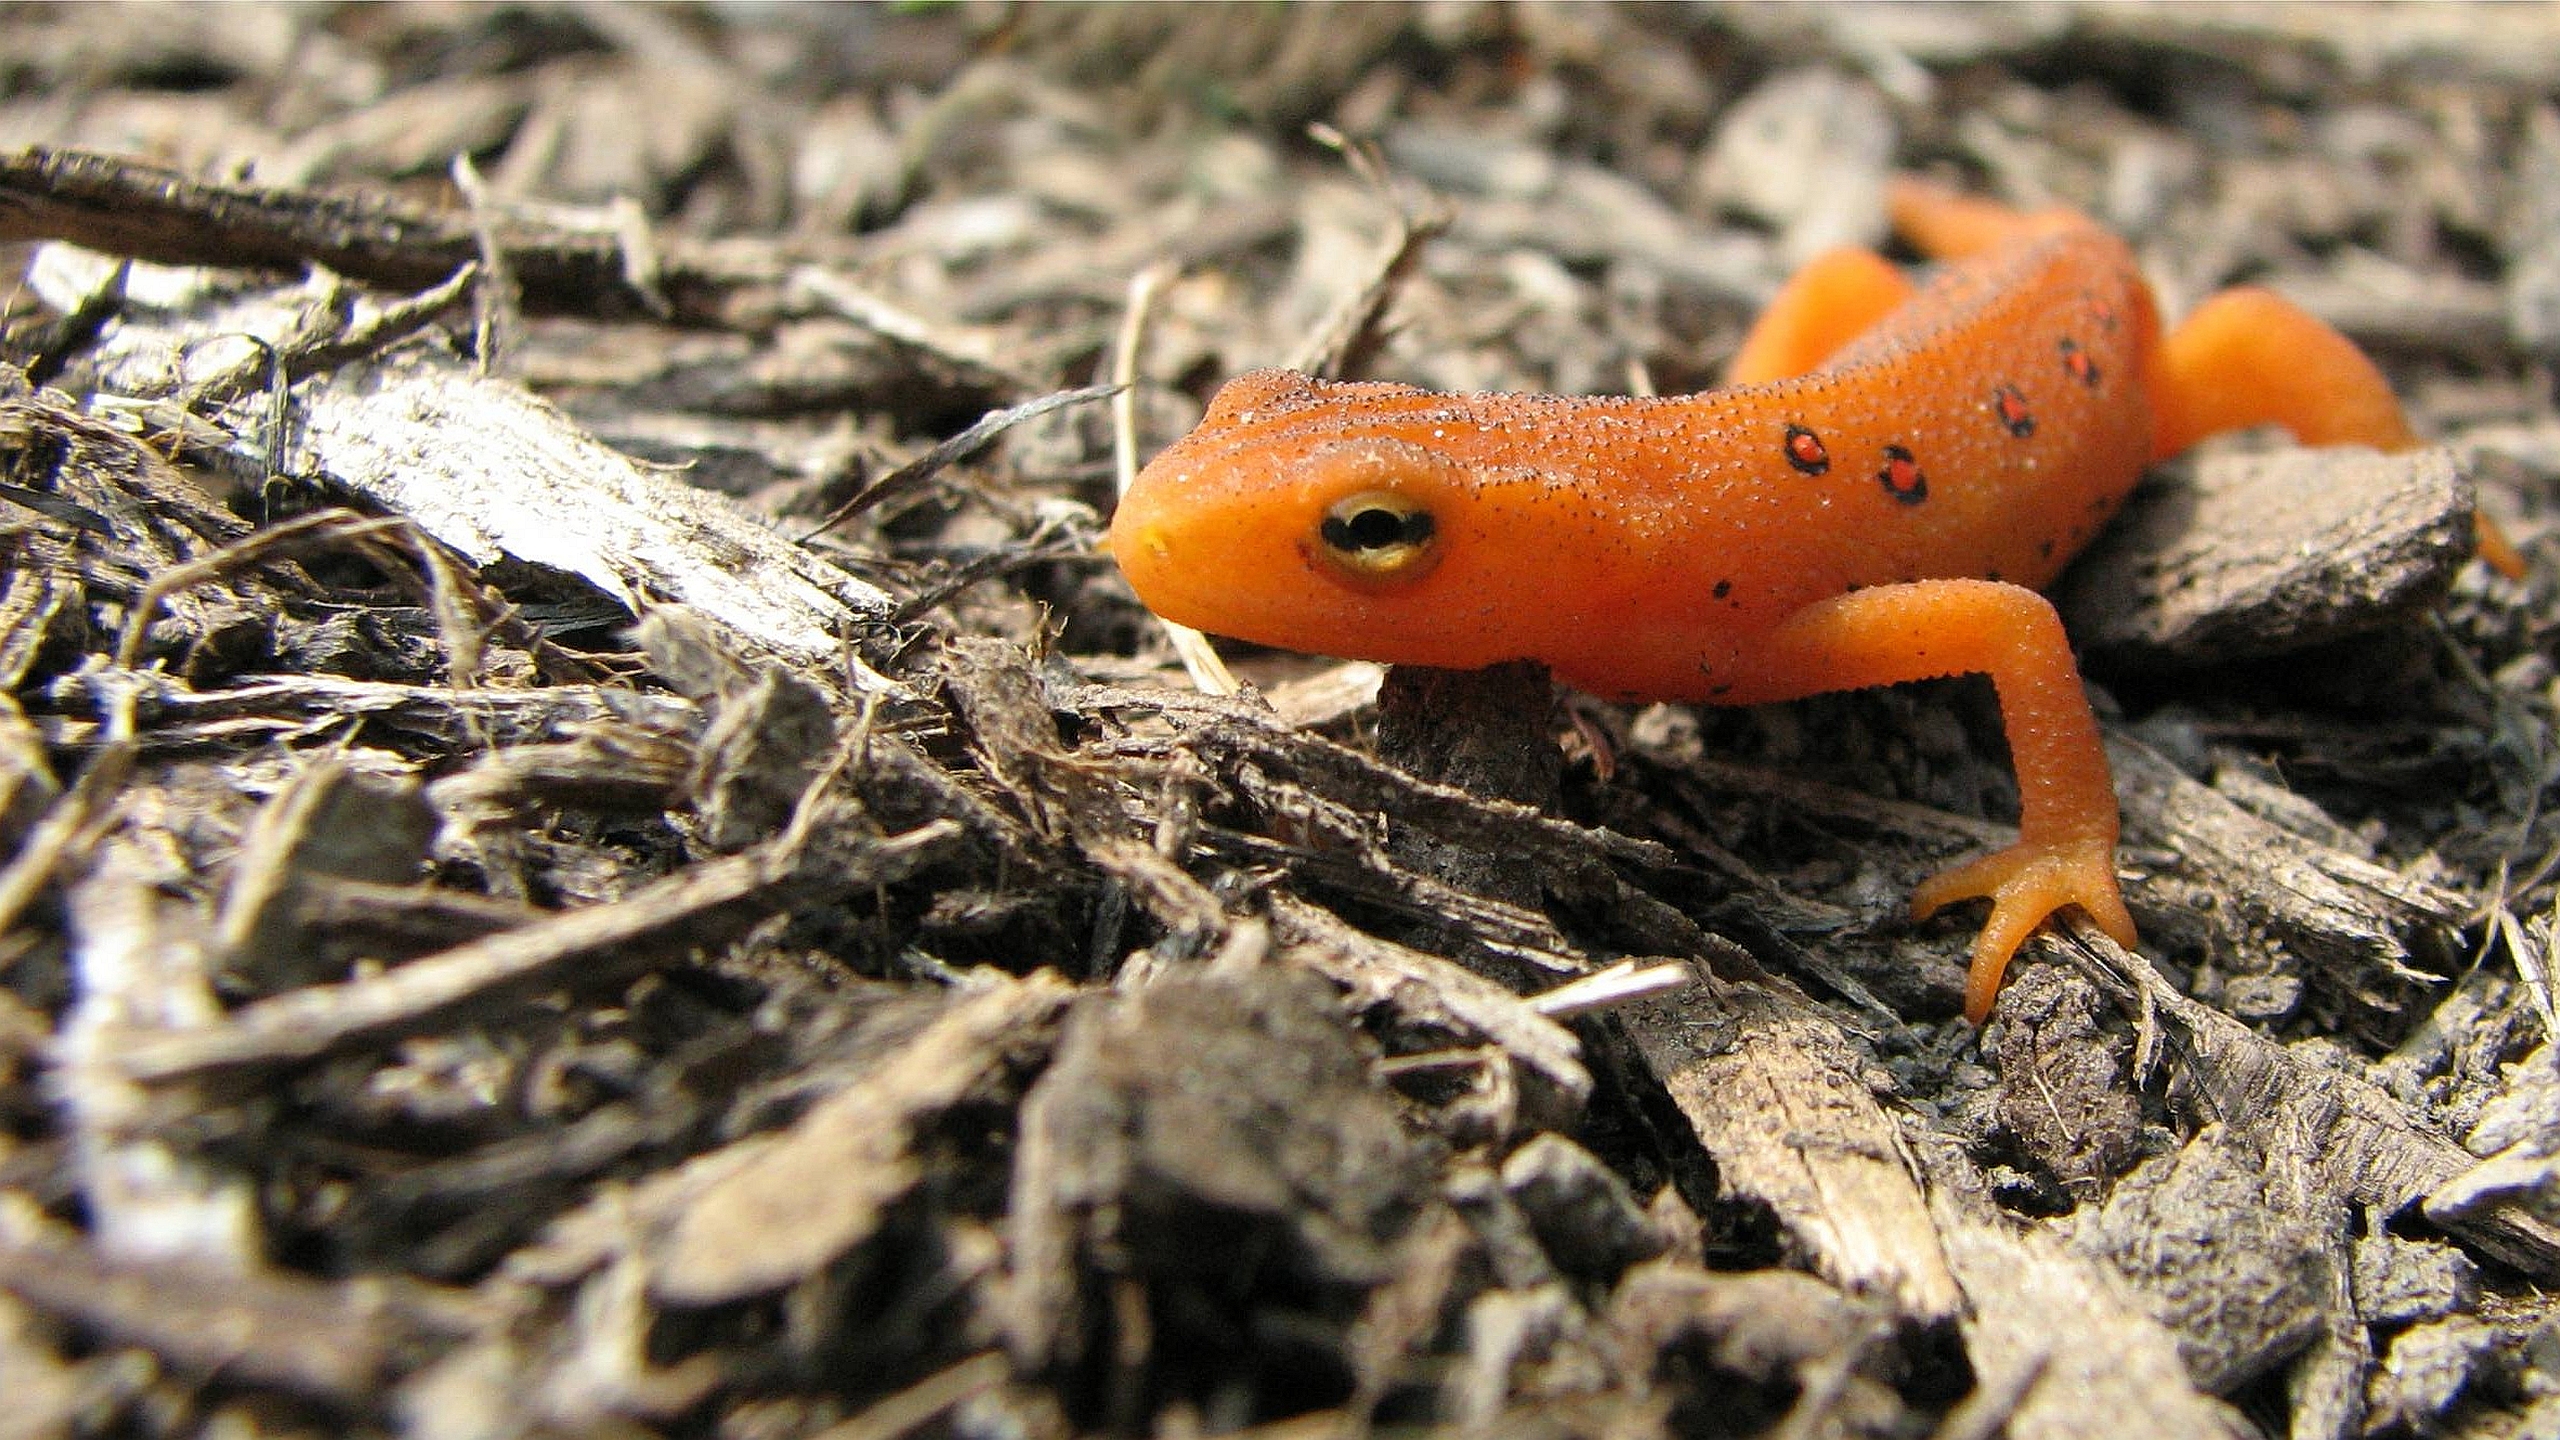 Eastern Newt  Backgrounds, Compatible - PC, Mobile, Gadgets| 2560x1440 px